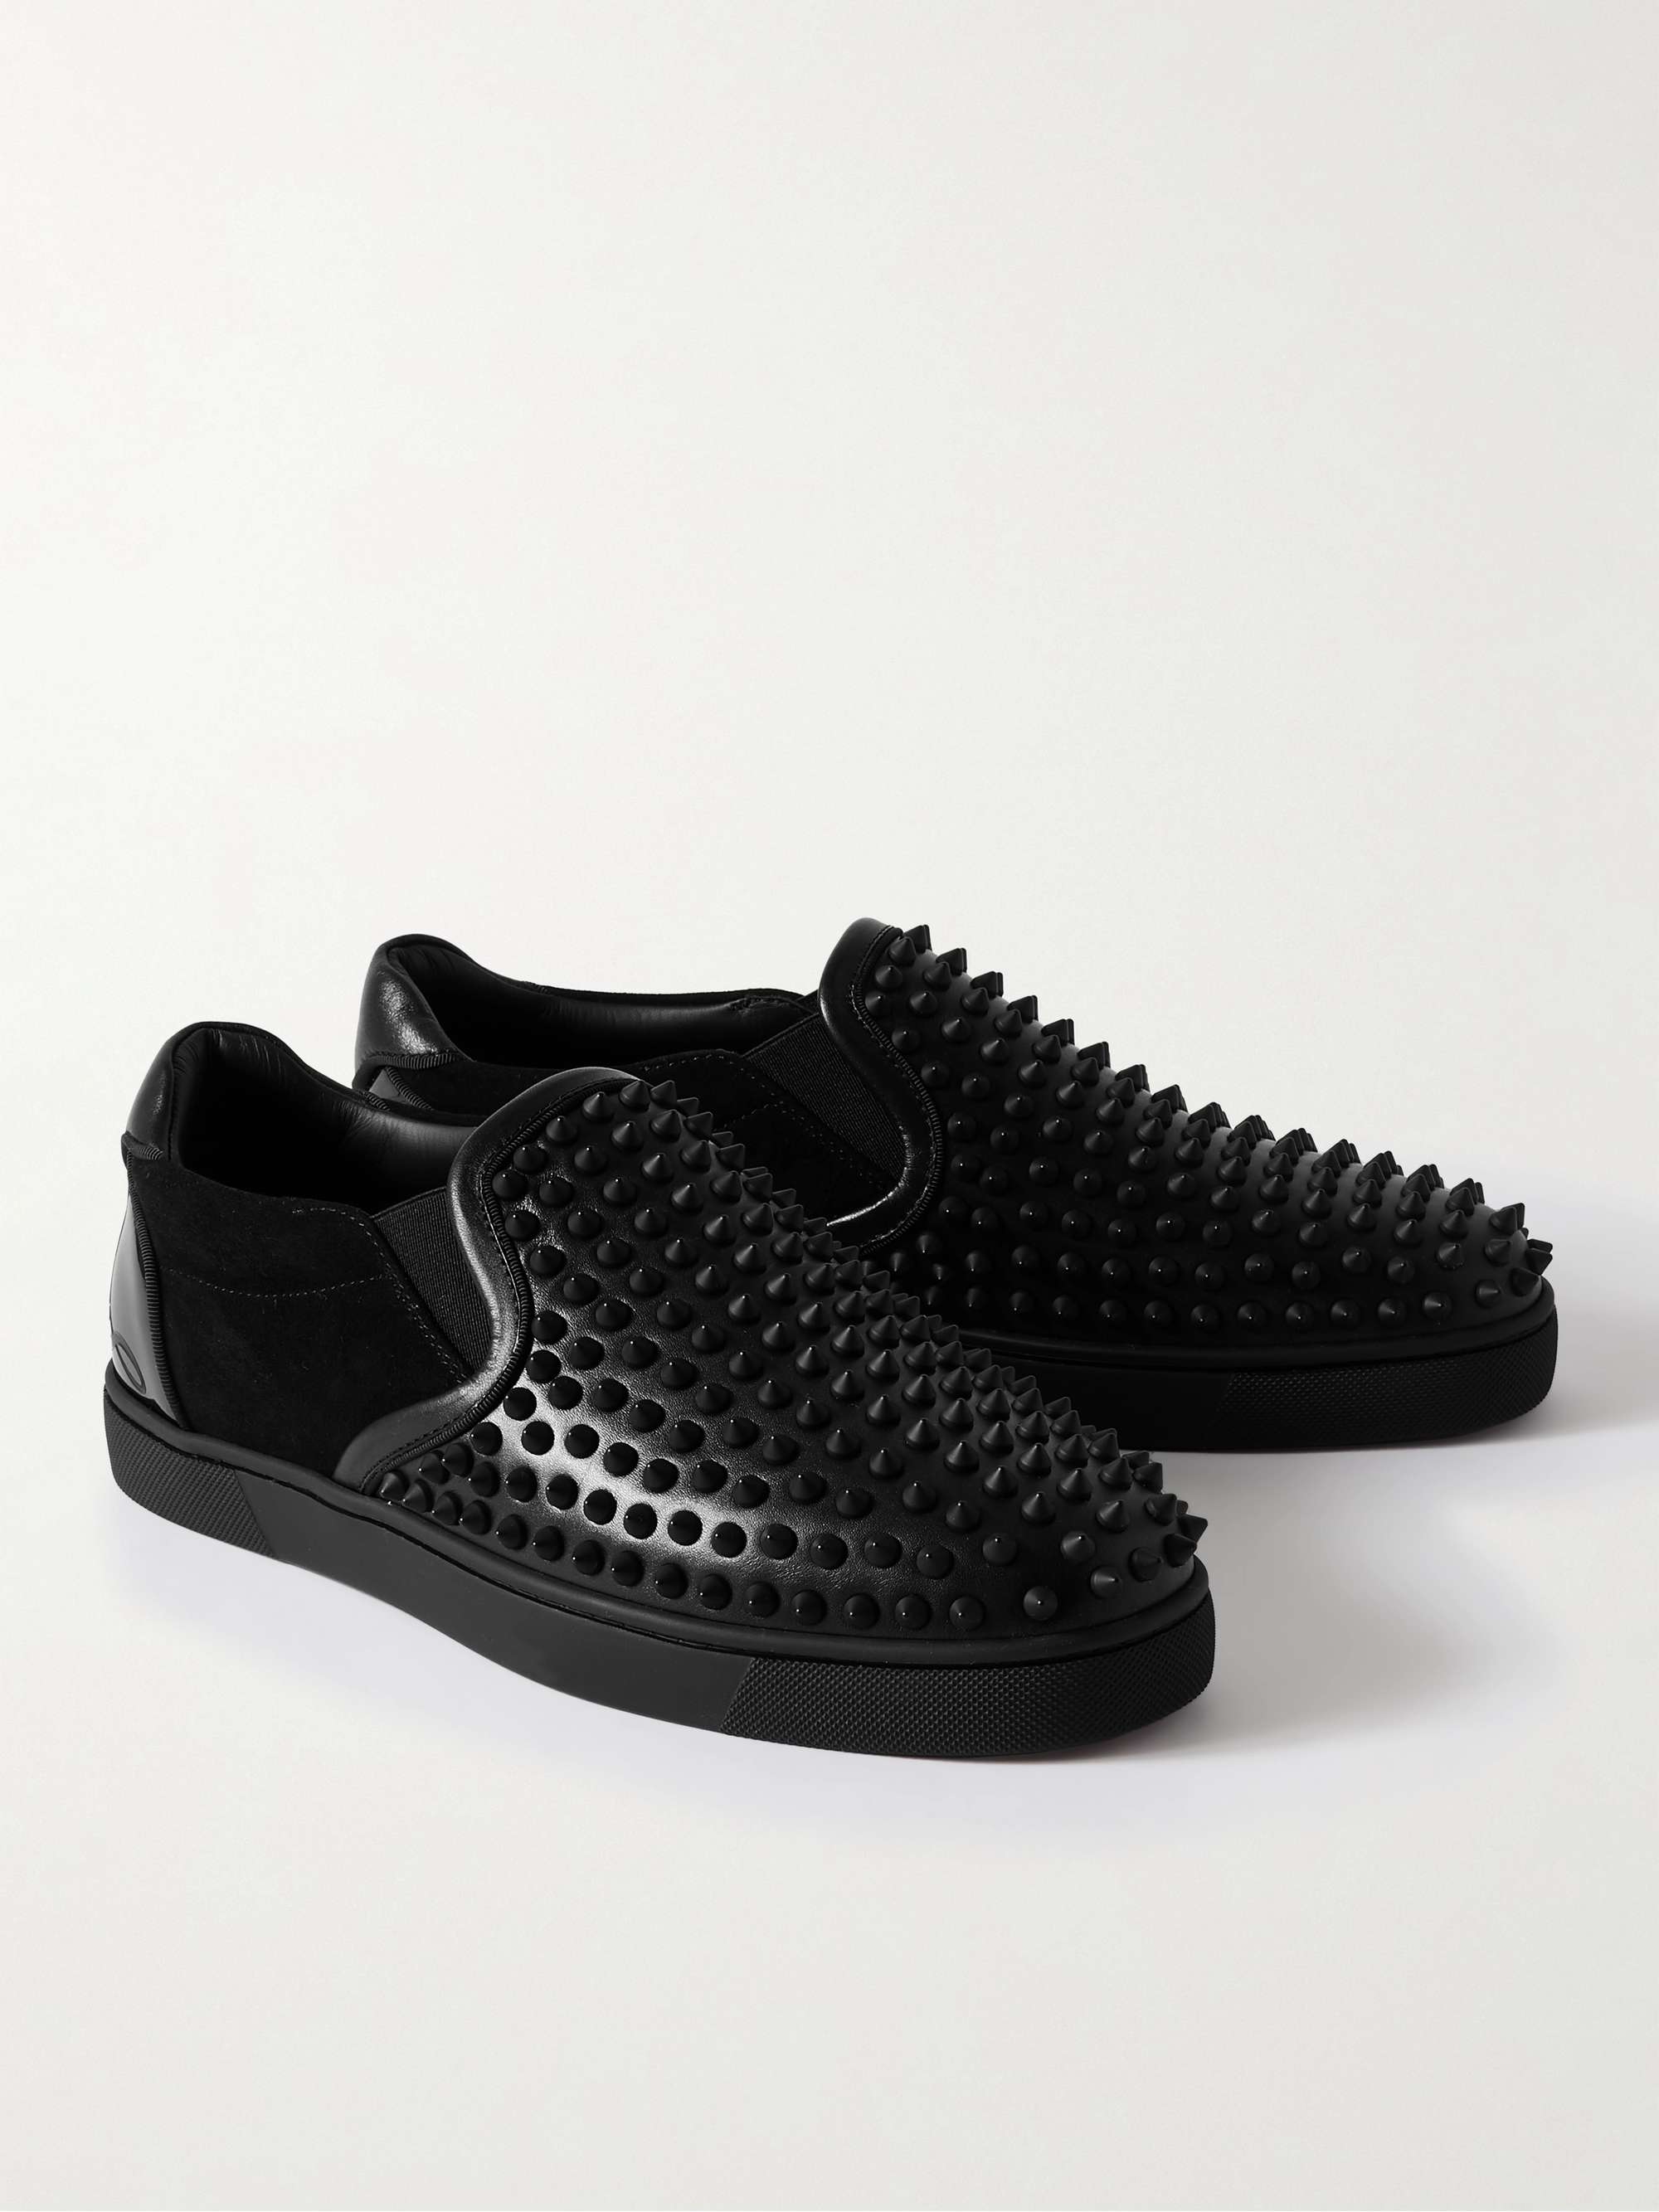 CHRISTIAN LOUBOUTIN Fun Sailor Studded Leather and Suede Slip-On Sneakers |  MR PORTER